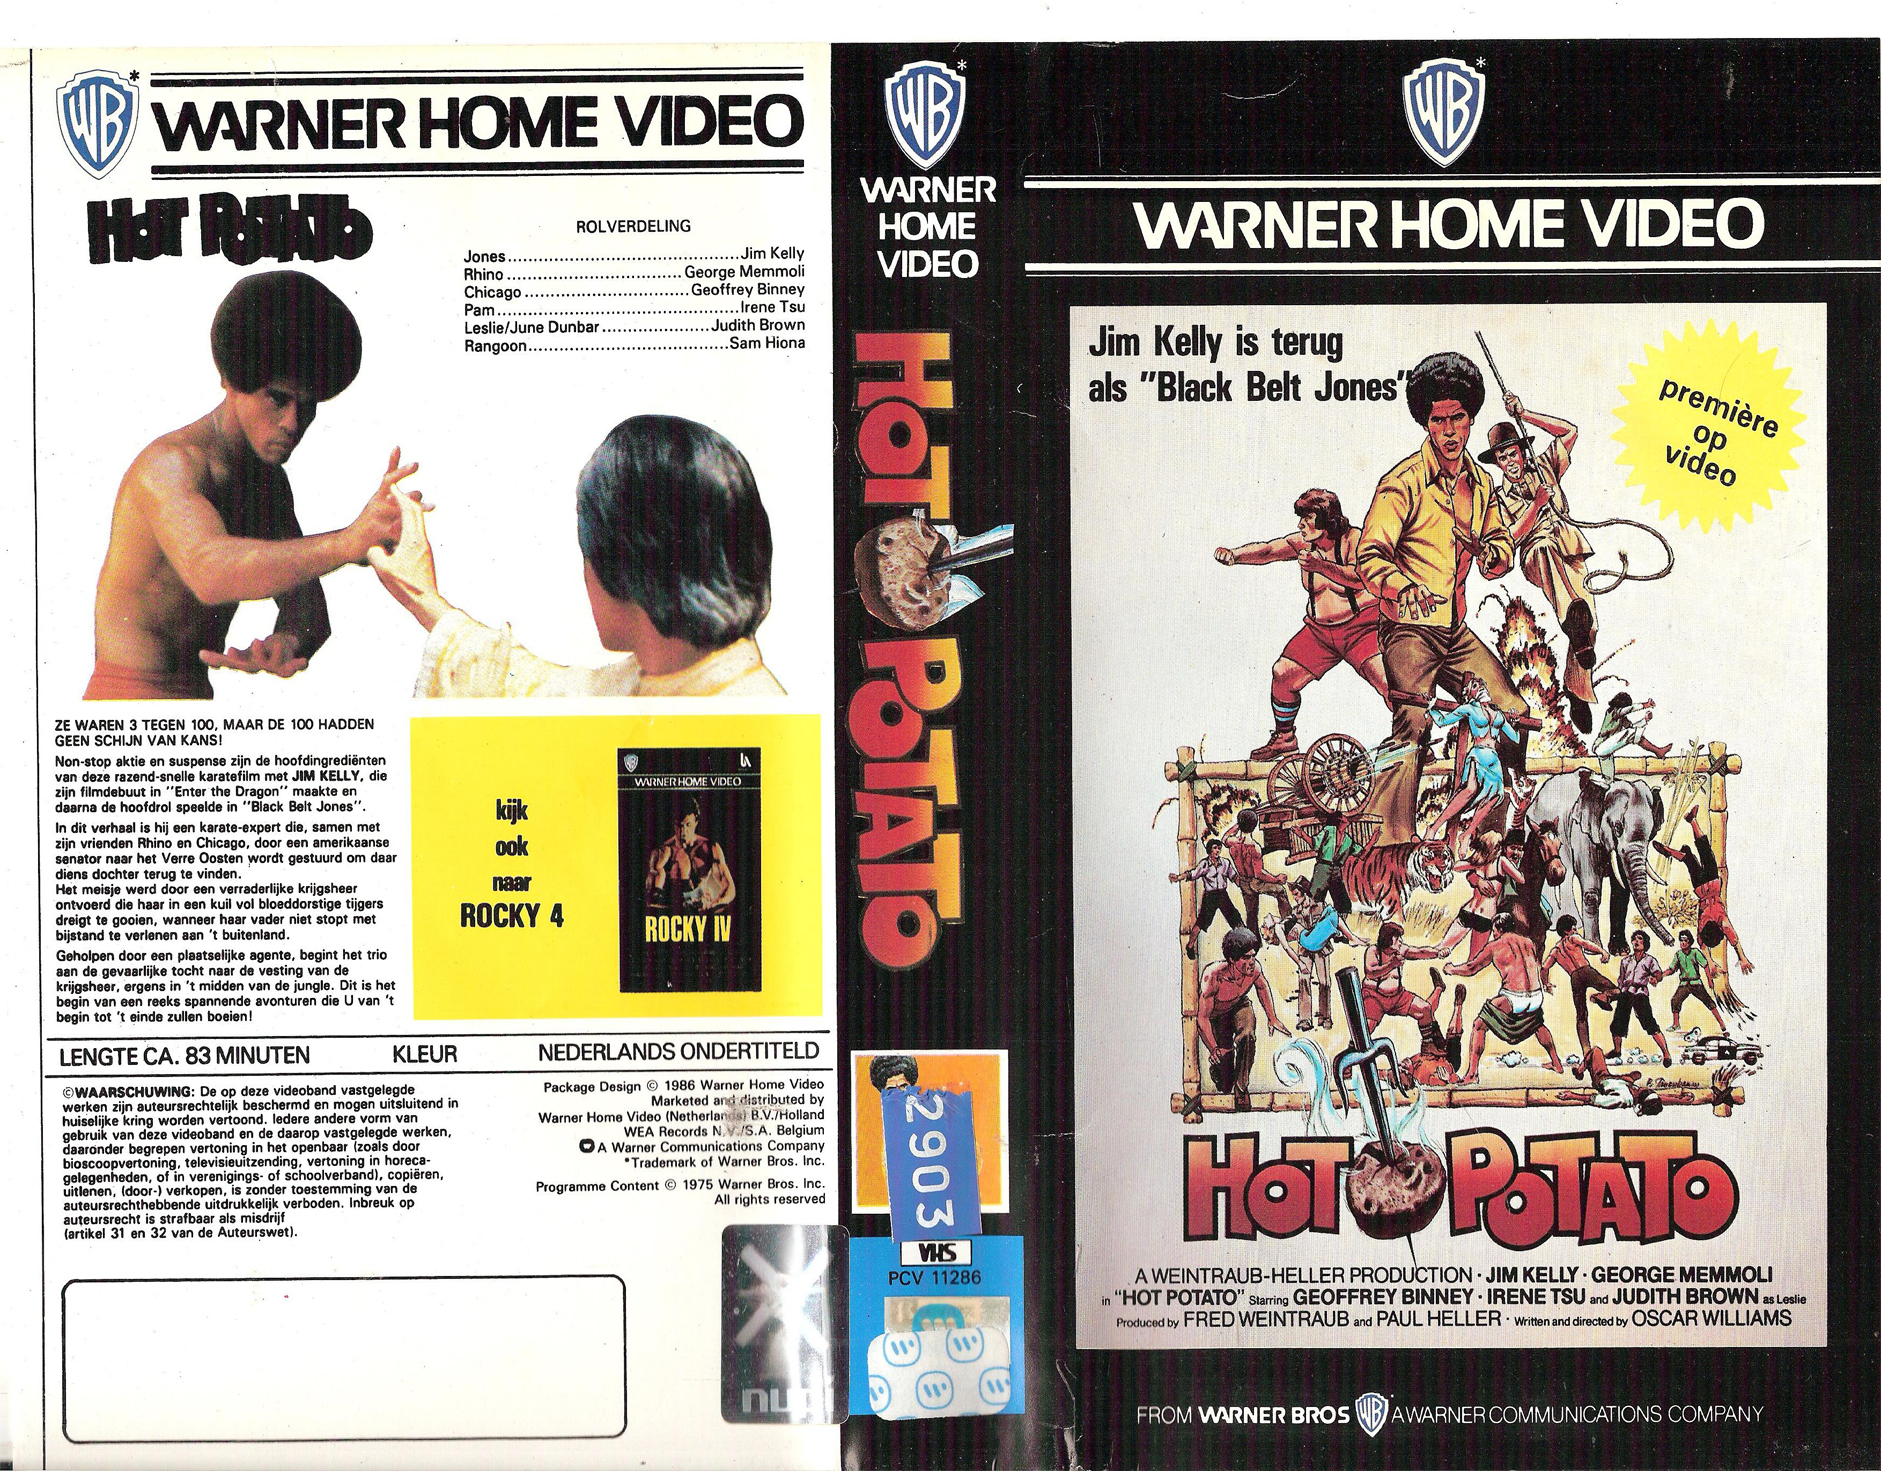 April 23 2016 VHS cover scan - click for high res version hot potato - subm...